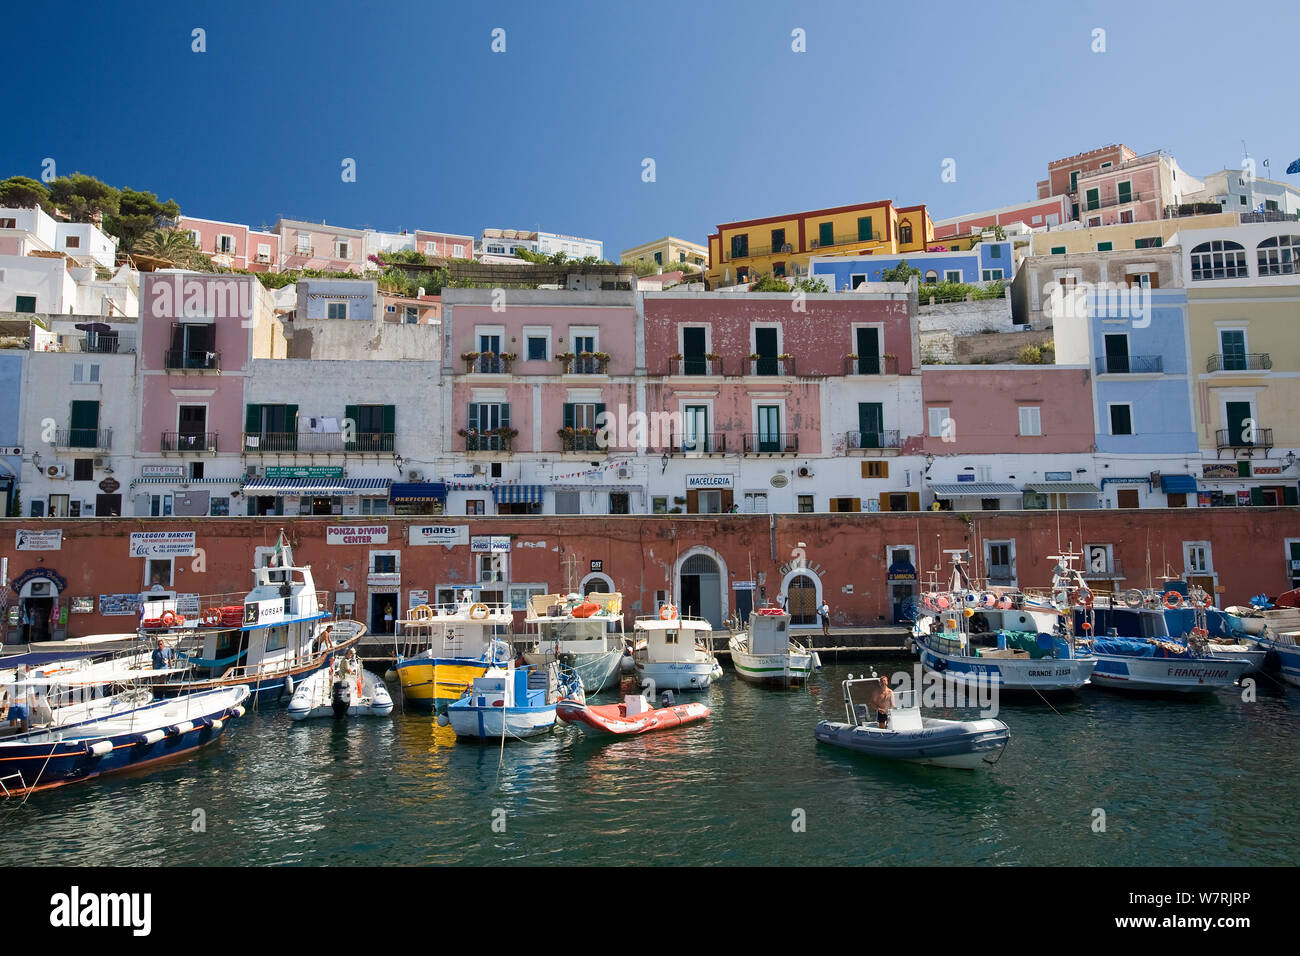 Colorful houses and fisherman boat inside Ponza's harbour, Ponza Island, Italy, Tyrrhenian Sea, Mediterranean, July 2008 Stock Photo